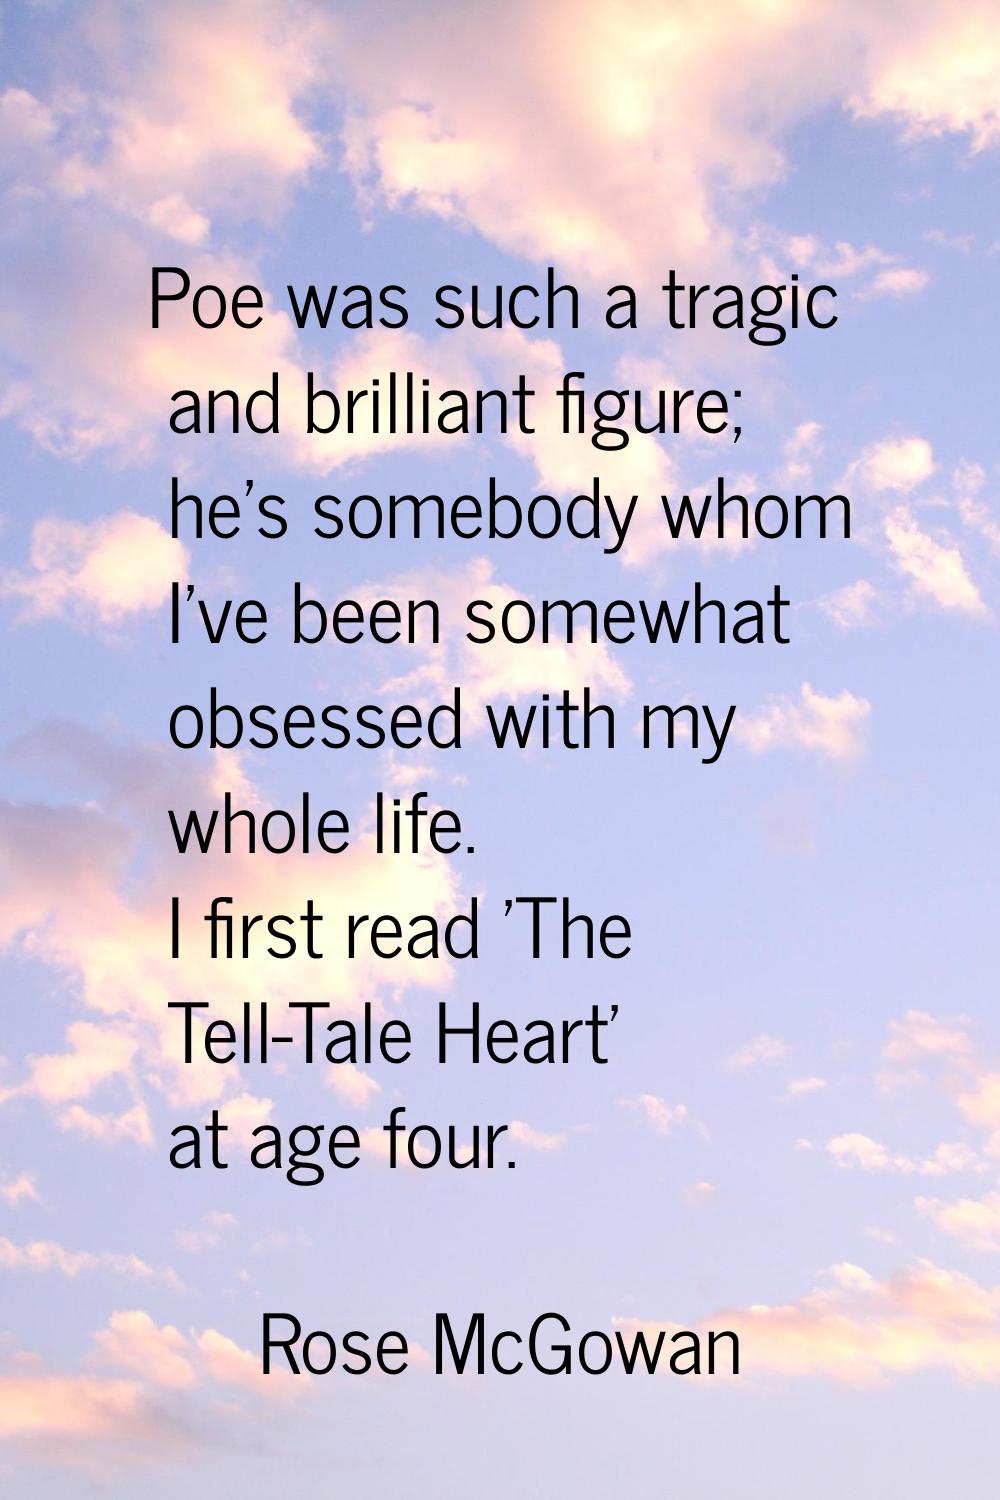 Poe was such a tragic and brilliant figure; he's somebody whom I've been somewhat obsessed with my 